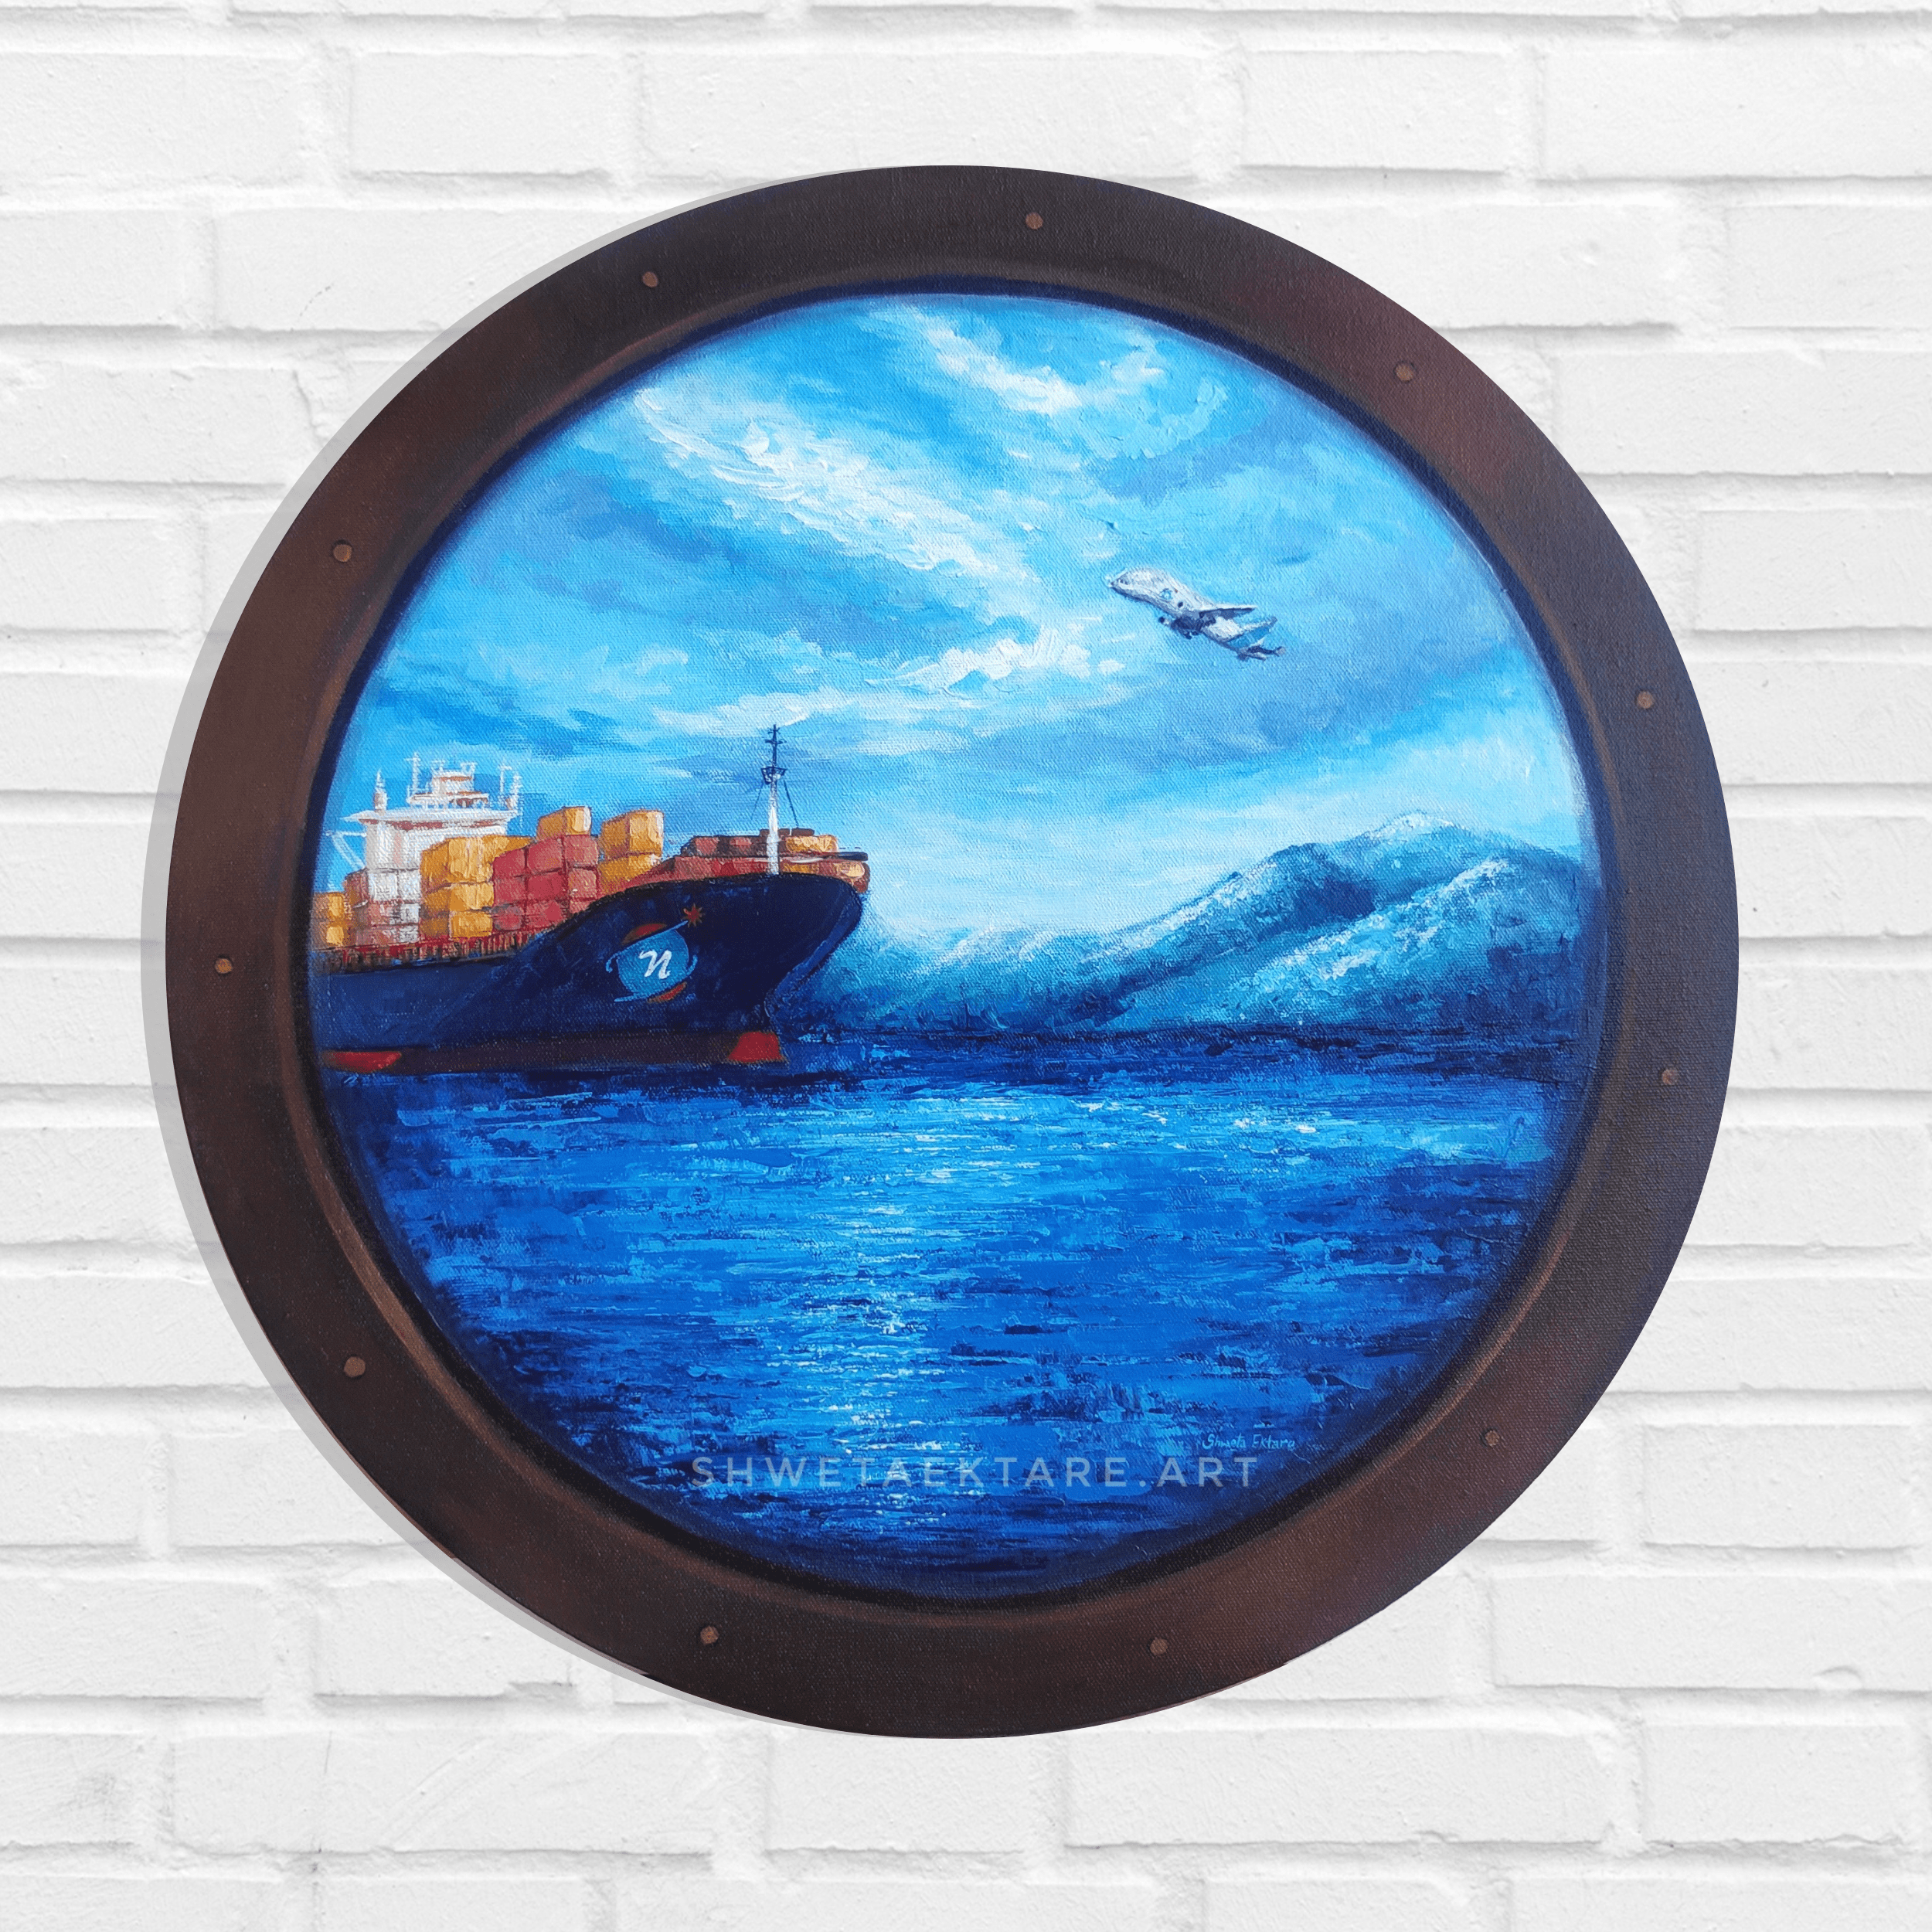 The painting was commissioned by N- Star Logistics on the occasion of their Office Anniversary.
The painting is created based on the vision and mission of the company and it should serve as a beautiful inspiration as well.
20 inches Diameter